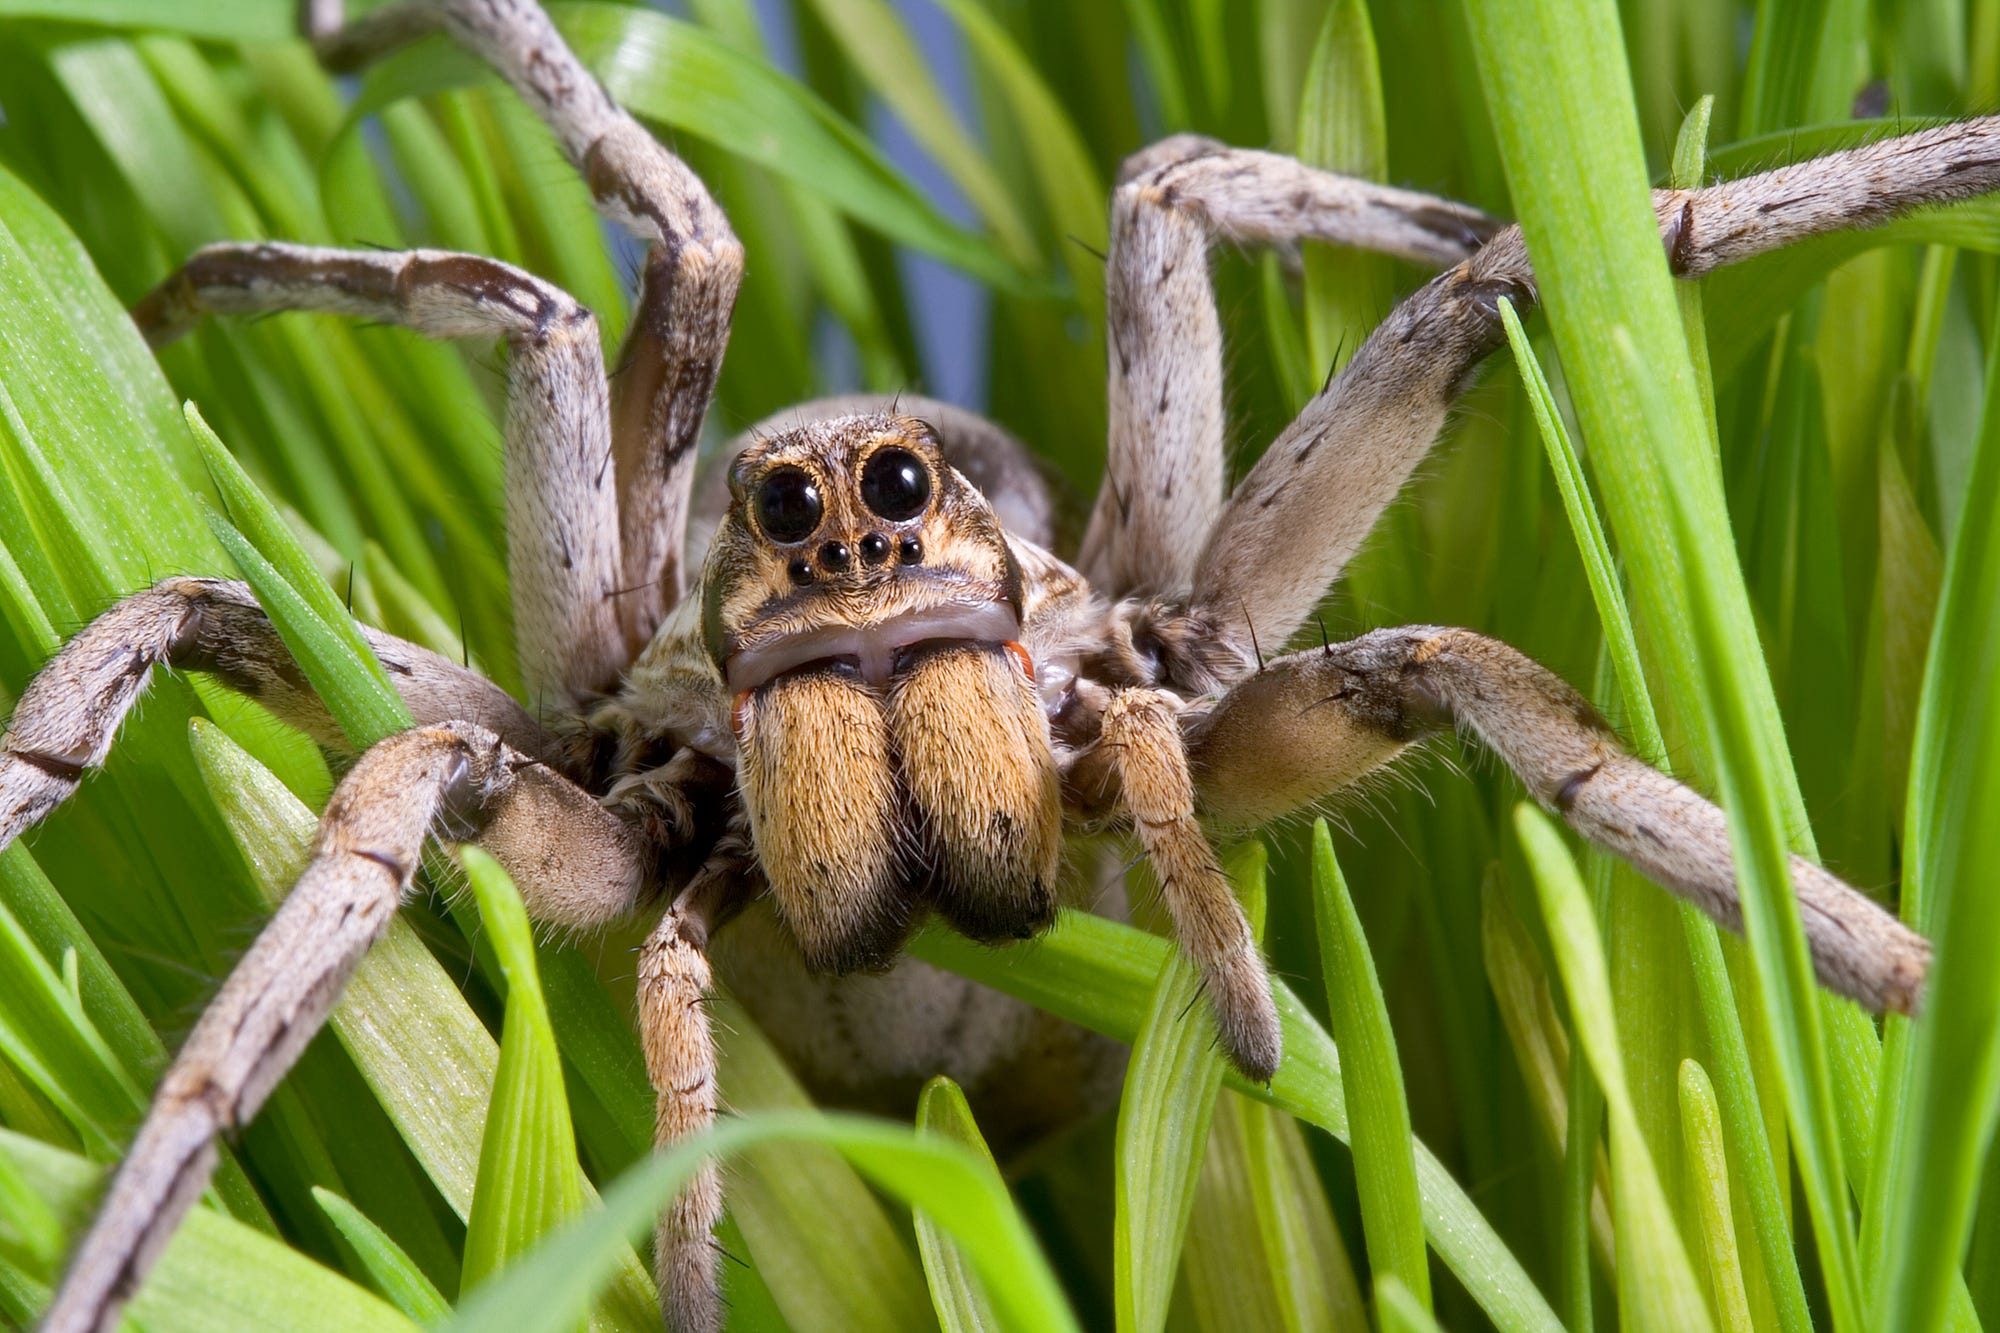 Spiders actually look bigger to arachnophobes